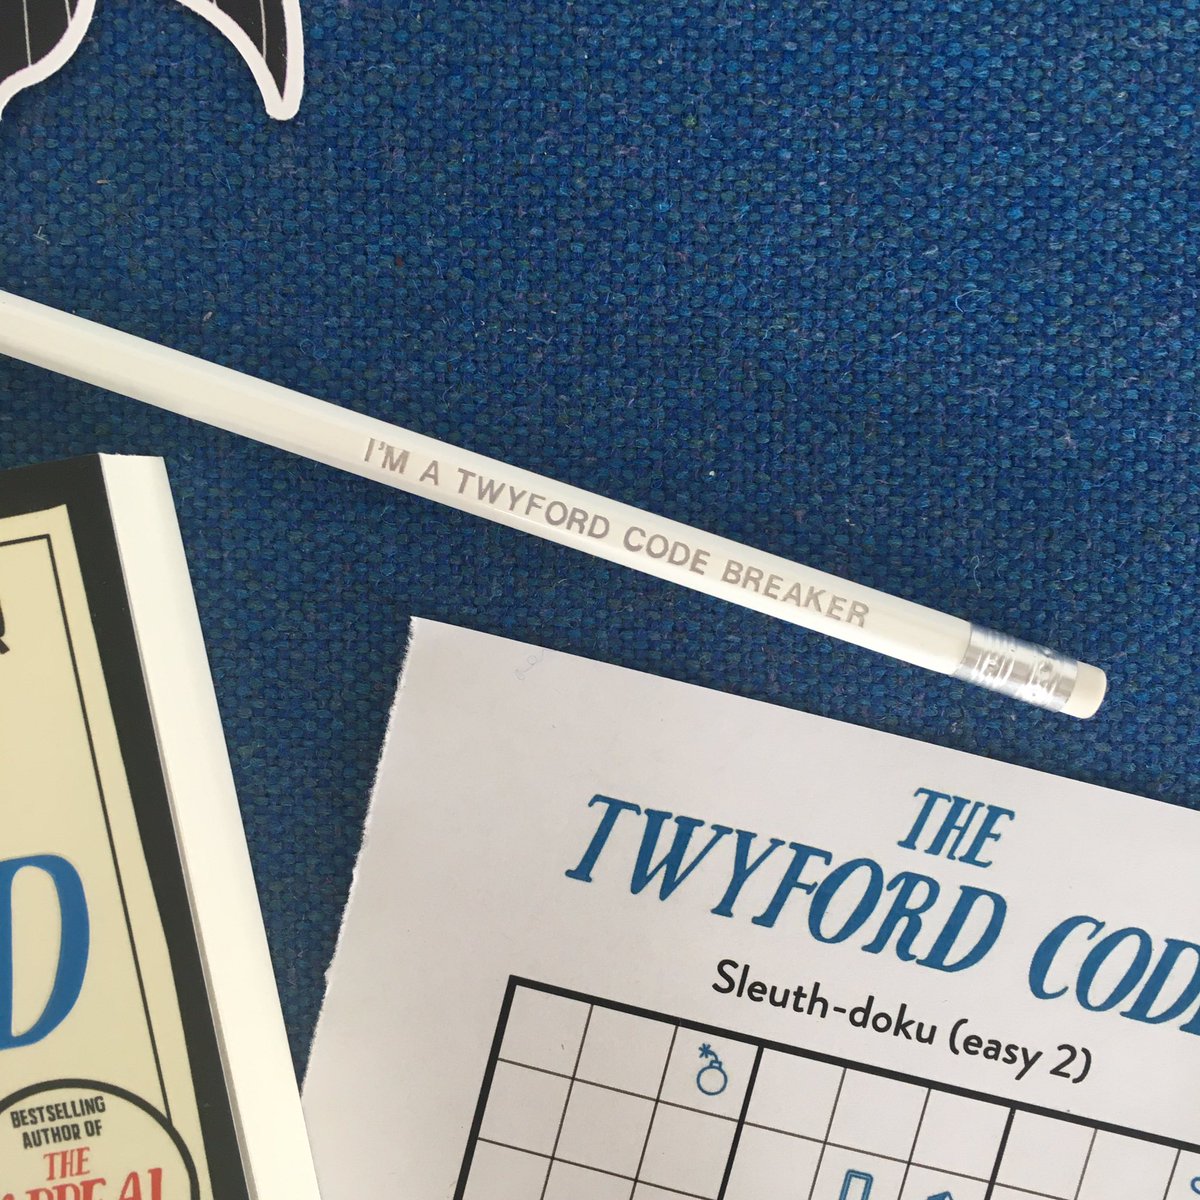 📢 WIN! We have THREE highly coveted #TheTwyfordCode packs to give away, including a special codebreaker pencil, sleuthdokus, stickers and a rare copy of Edith Twyford’s #SixonGoldtopHill 🐟🕵️‍♀️

RT before midnight on Sunday to enter. Prizes to UK addresses only. Good luck!